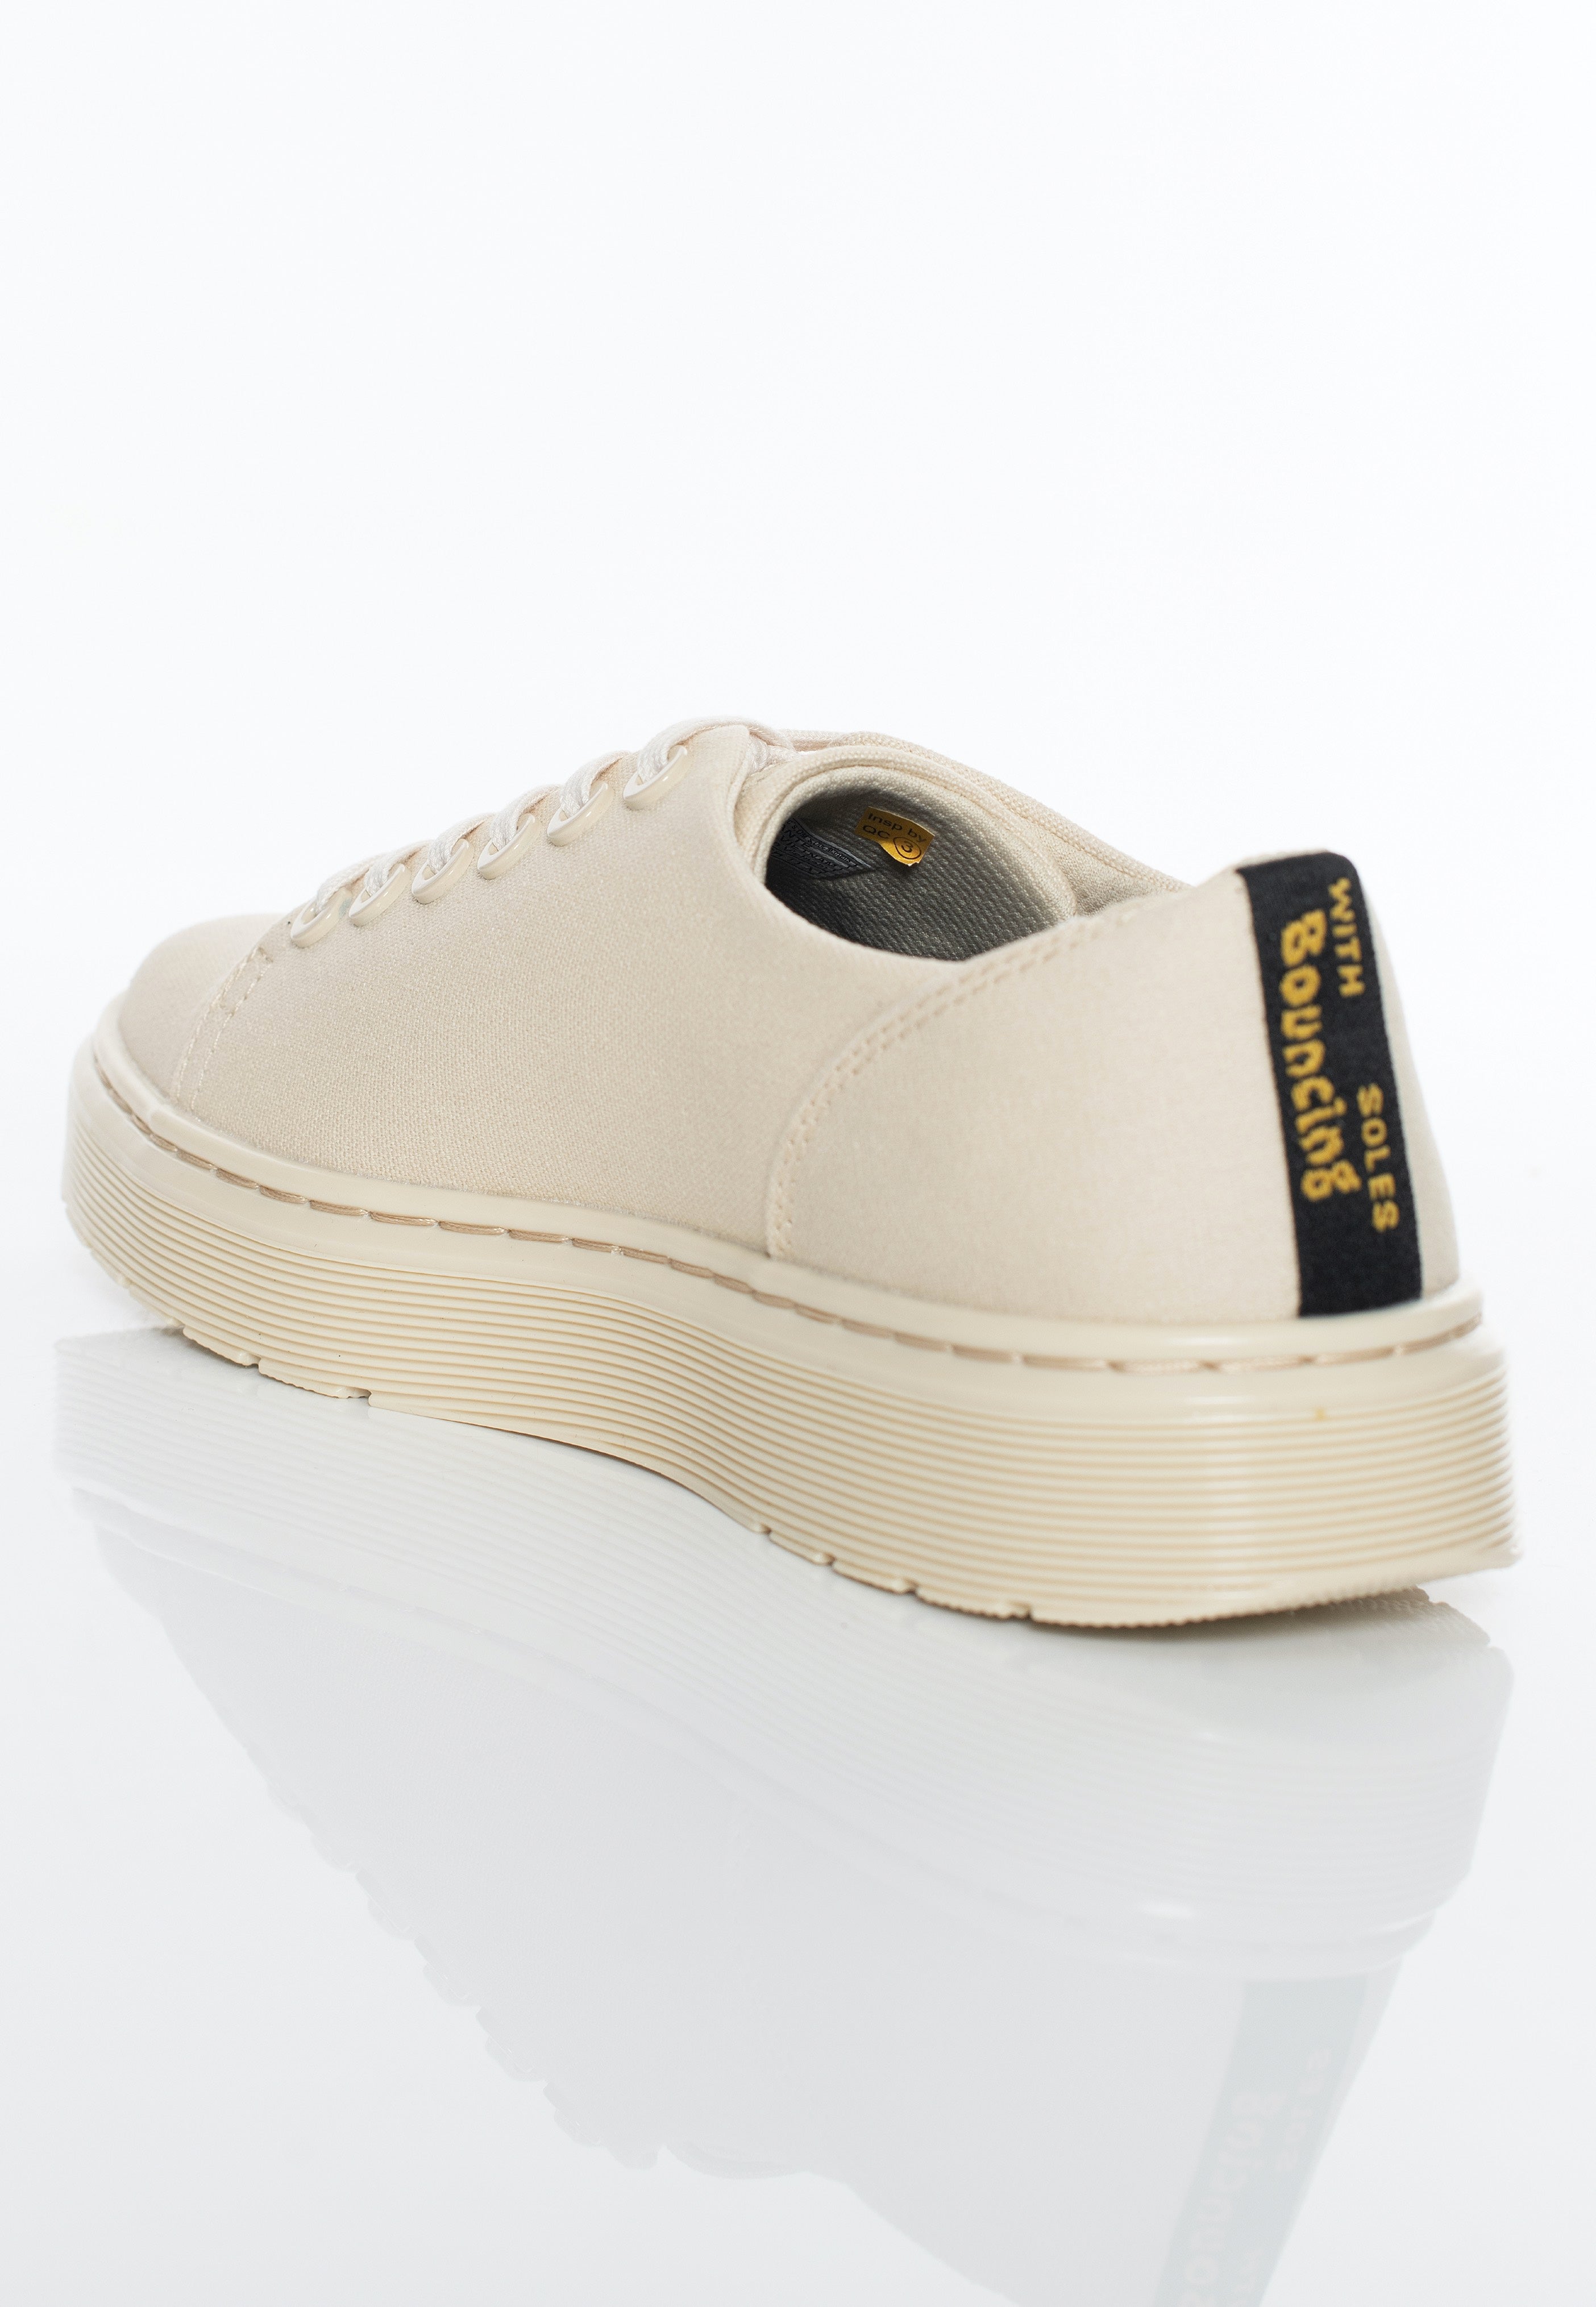 Dr. Martens - Dante 10 Canvas/Parchment Beige Milled Coated Leather - Girl Shoes